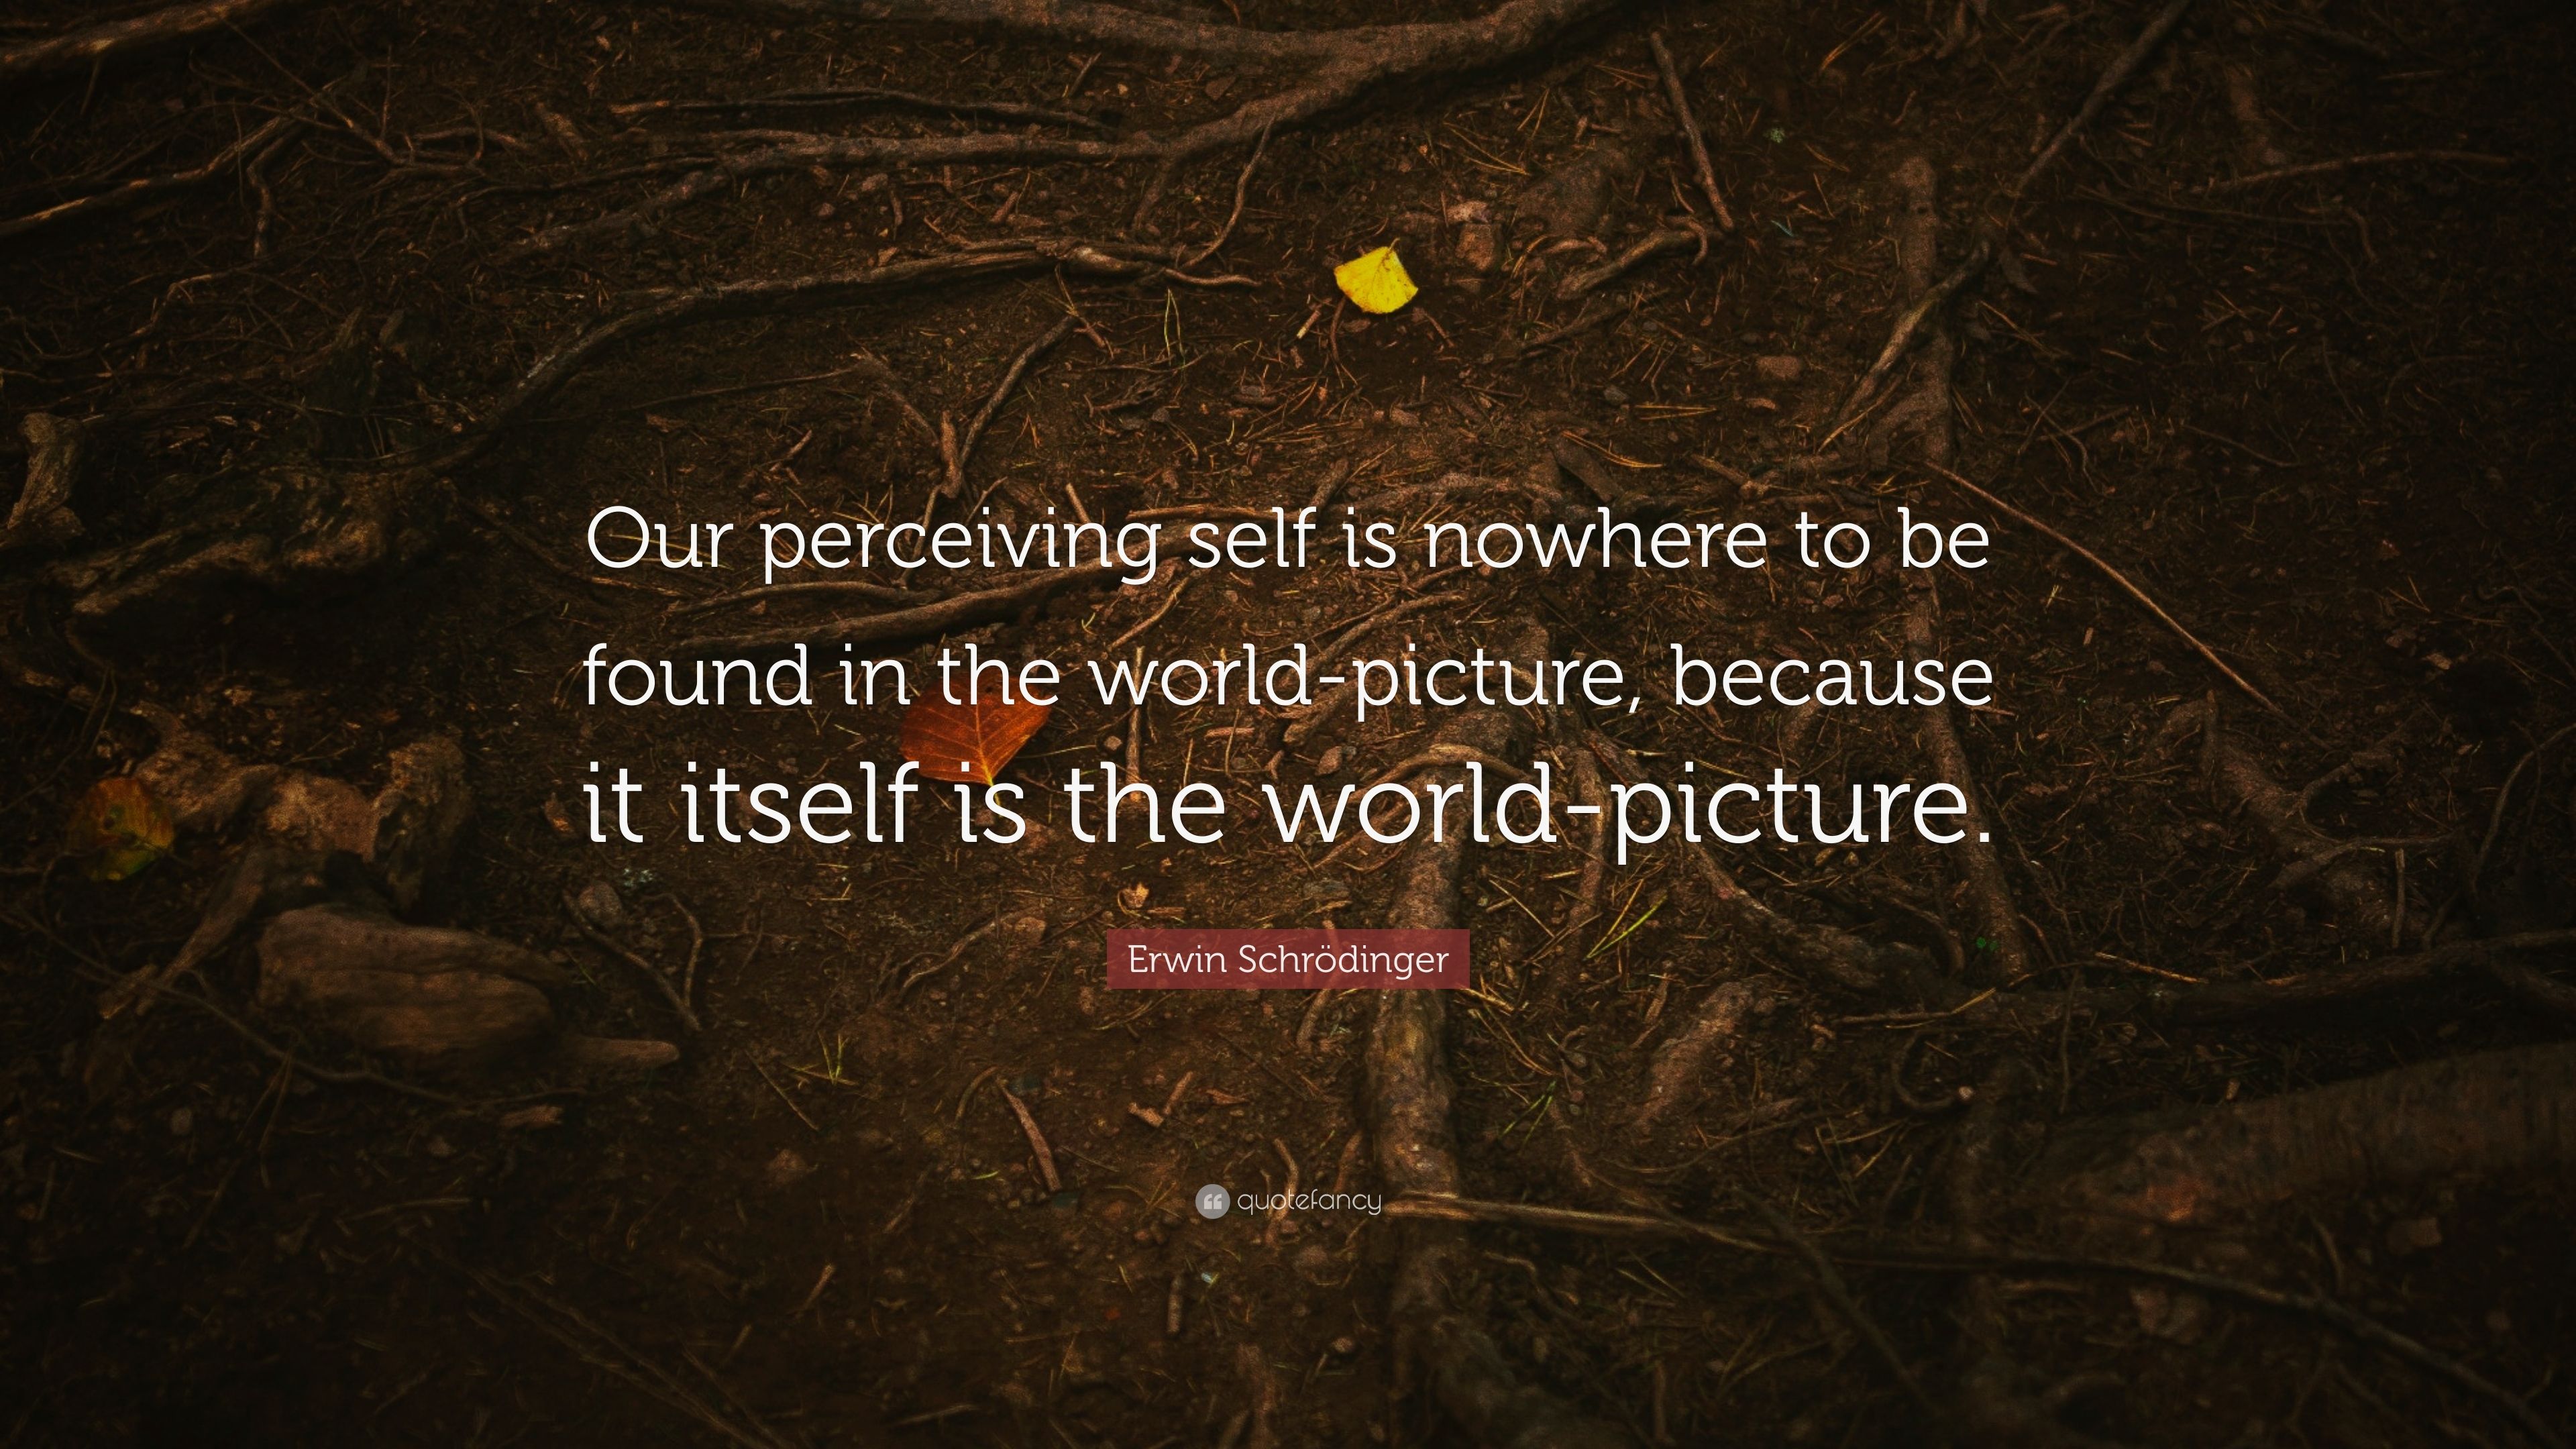 Erwin Schrödinger Quote: “Our Perceiving Self Is Nowhere To Be Found In The World Picture, Because